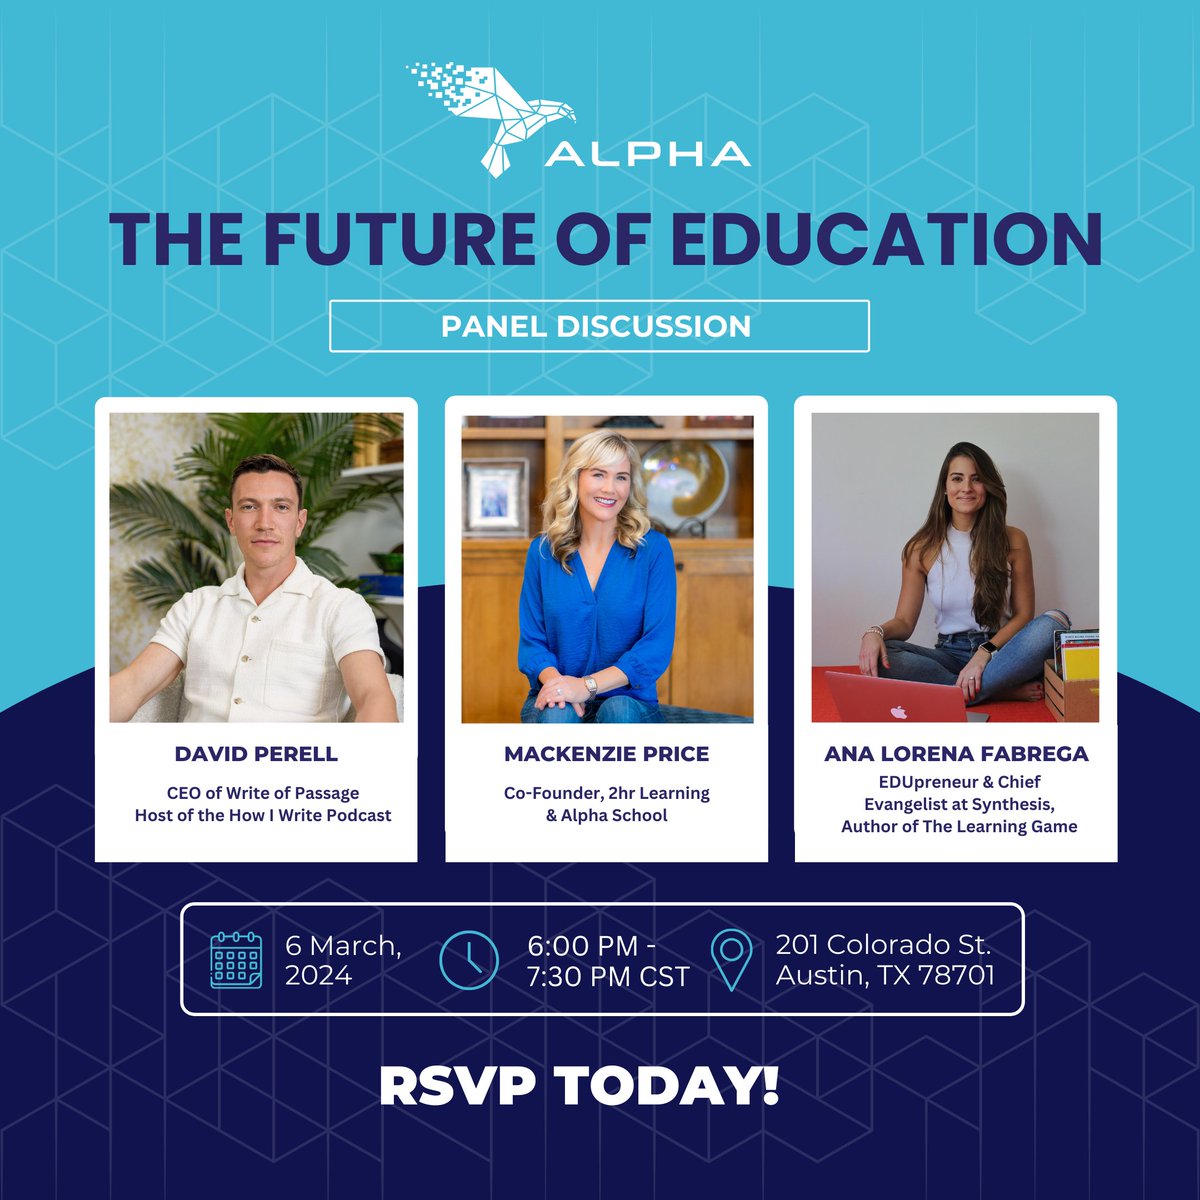 Austin friends! Join me, @david_perell and @mackenzieprice in person this Wednesday, March 6 for a 🔥 discussion about the future of education! RSVP below: go.alpha.school/panel-discussi…